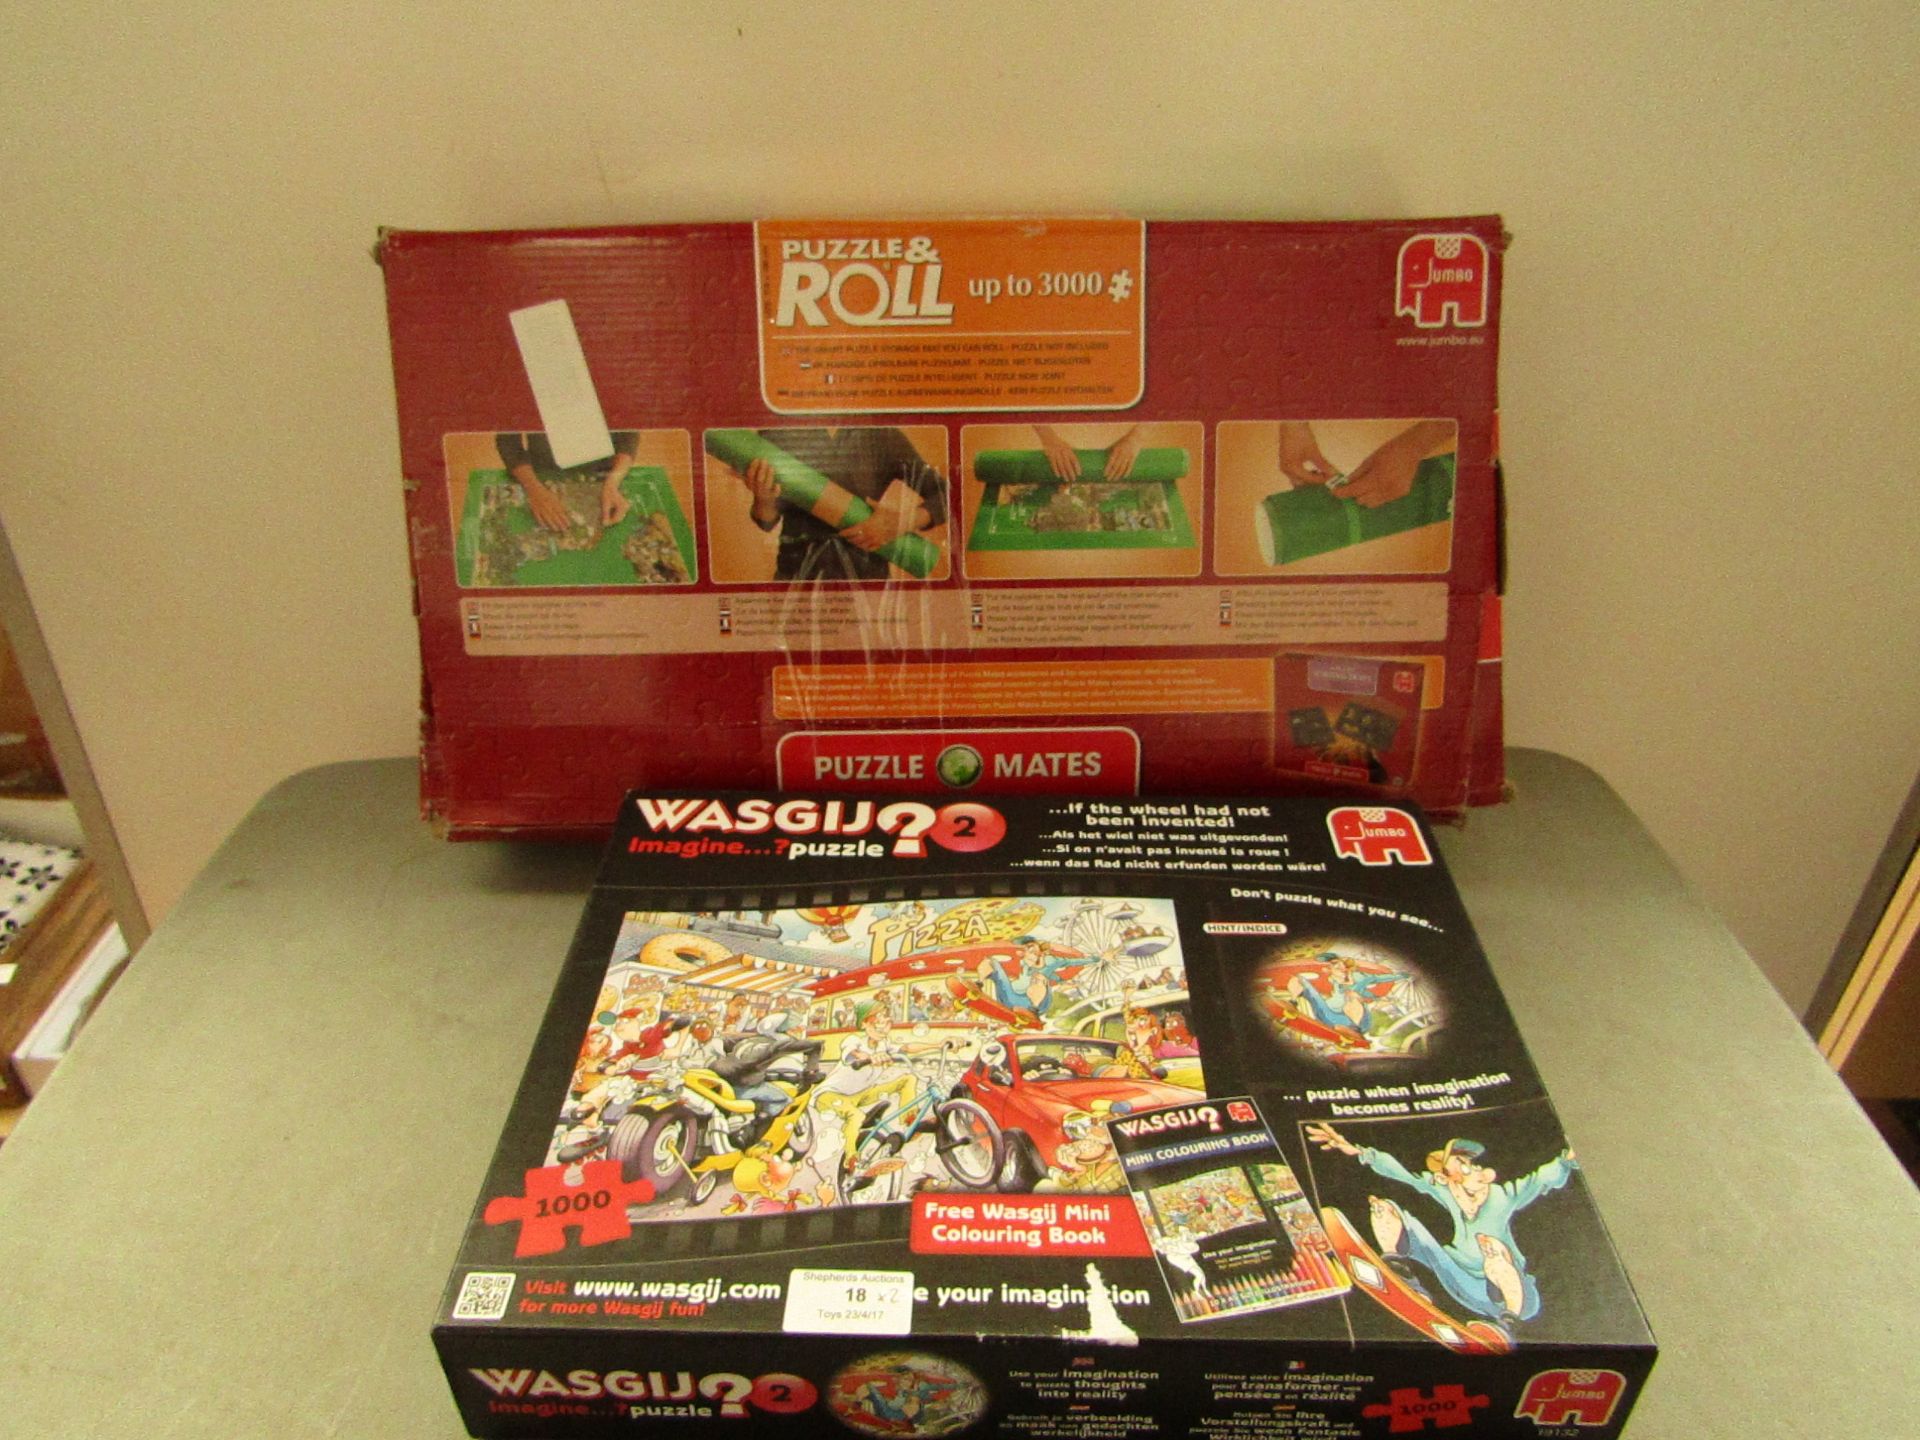 2x Puzzle sets being; Wasgij 1000pc set and Puzzle & roll storage mat. Both unchecked and boxed.